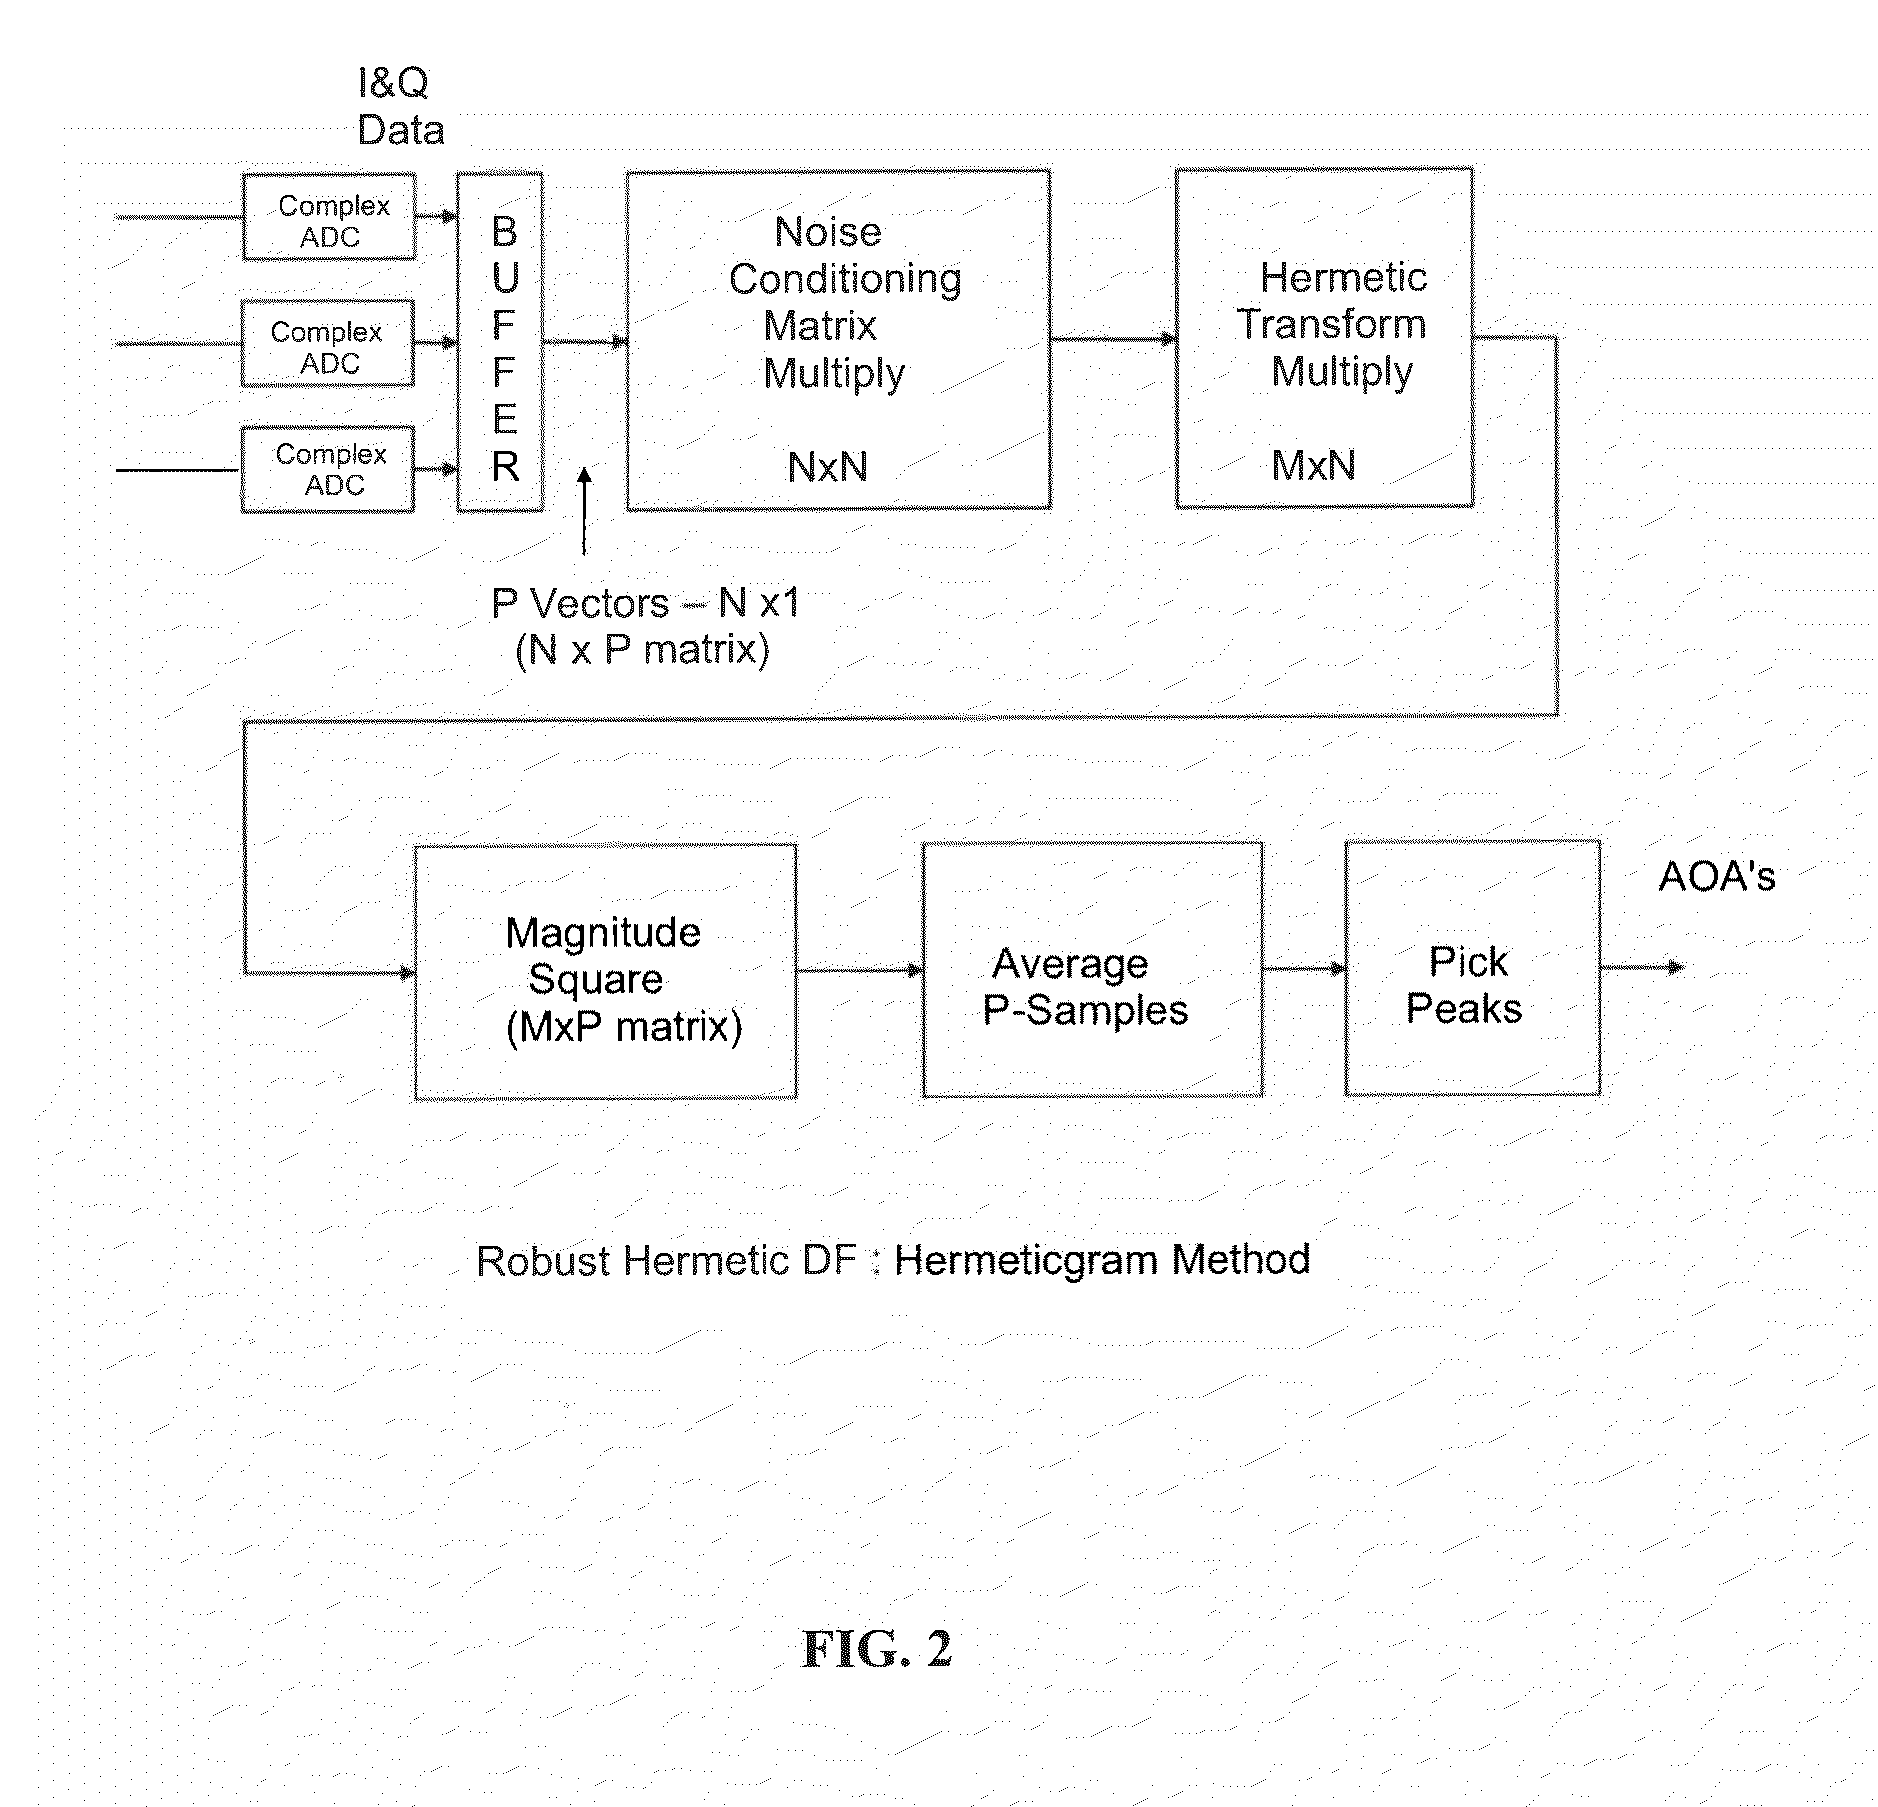 Devices and methods using the hermetic transform for transmitting and receiving signals using OFDM